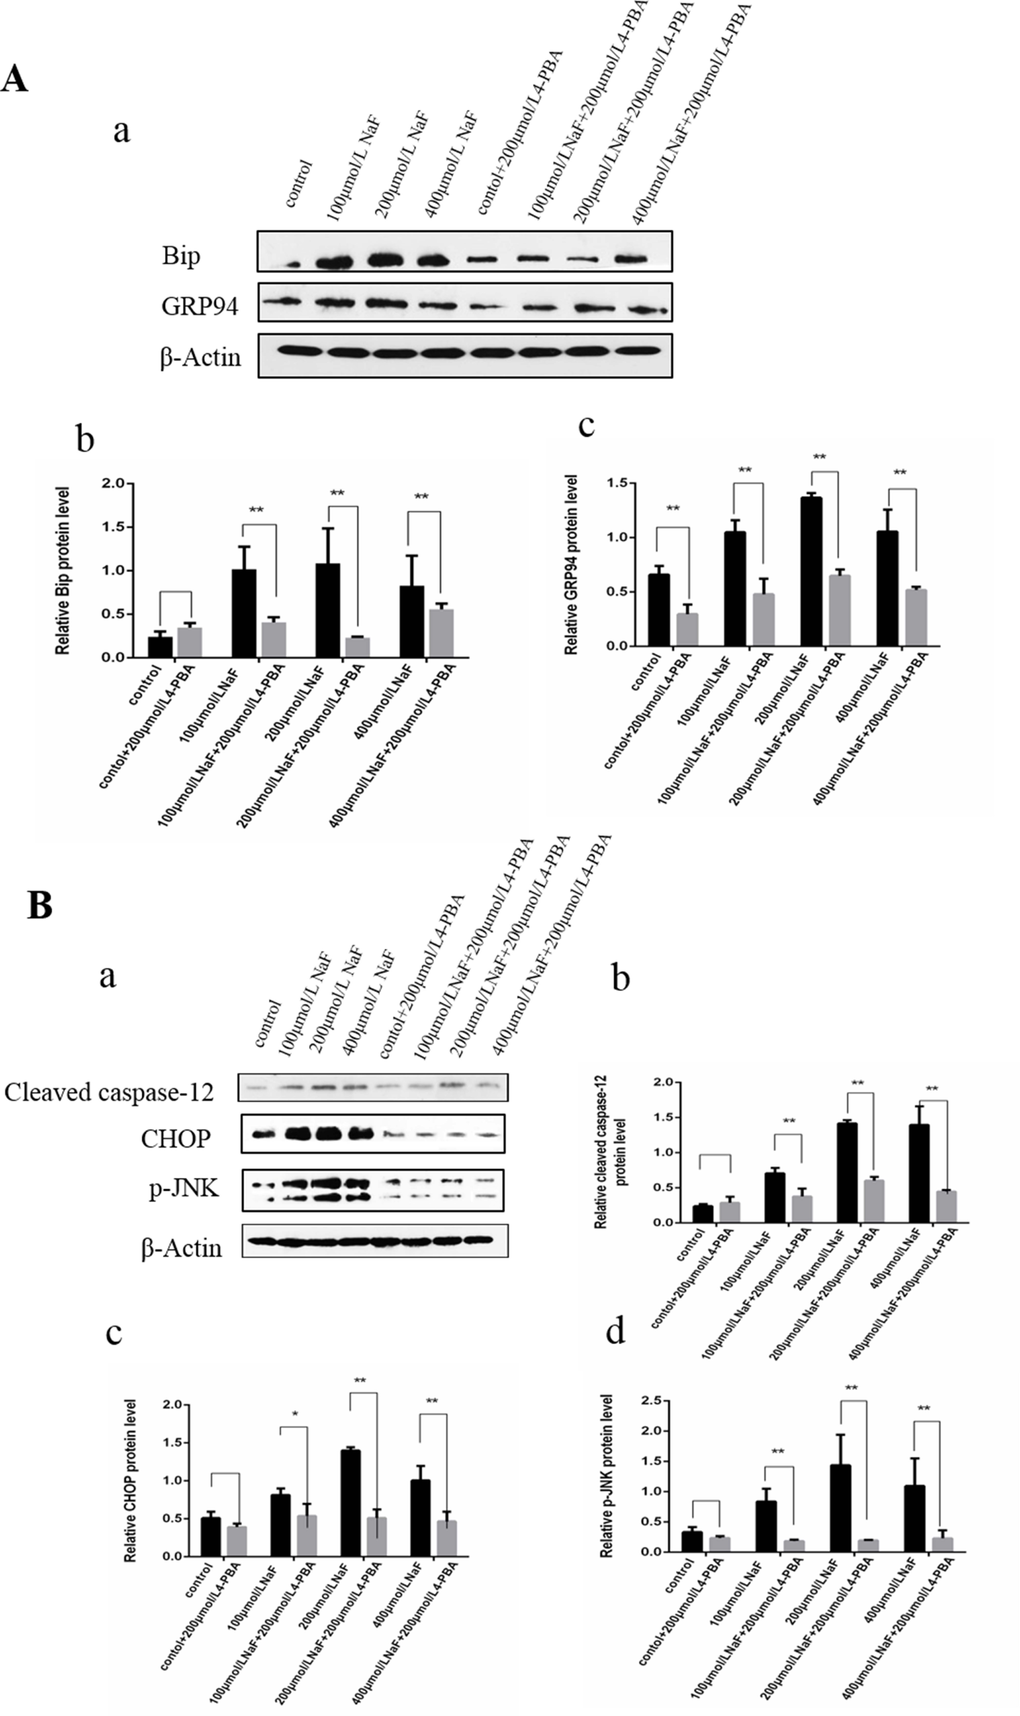 Effect of NaF and NaF-combined with 4-PBA treatment on protein expression levels of Bip, GRP94, cleaved caspase-12, p-JNK and CHOP in cultured splenic lymphocytes at 48 h. (a) The western blot assay. (b-c) Quantitative analysis of protein expression. Data are presented with the means ± standard deviation, * p p 